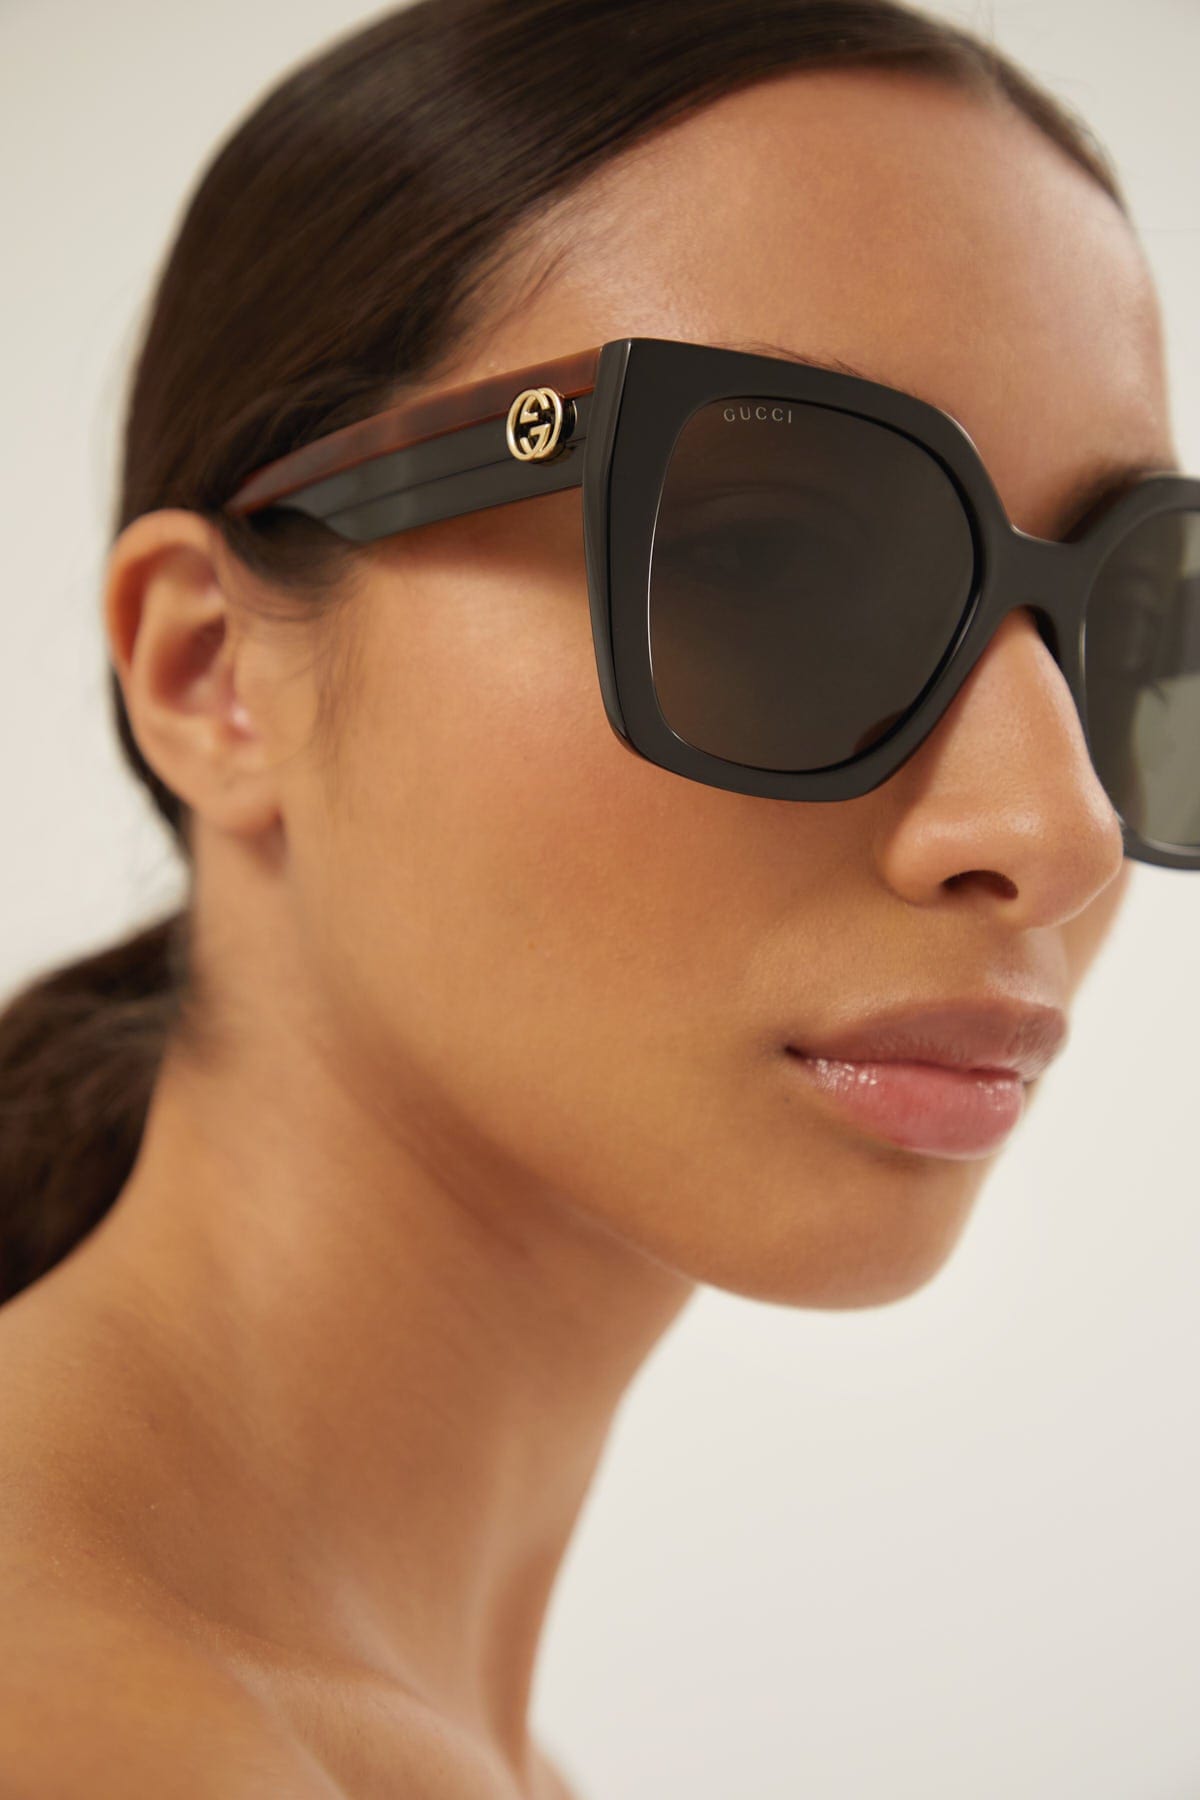 Gucci squared sunglasses with web temple - Eyewear Club